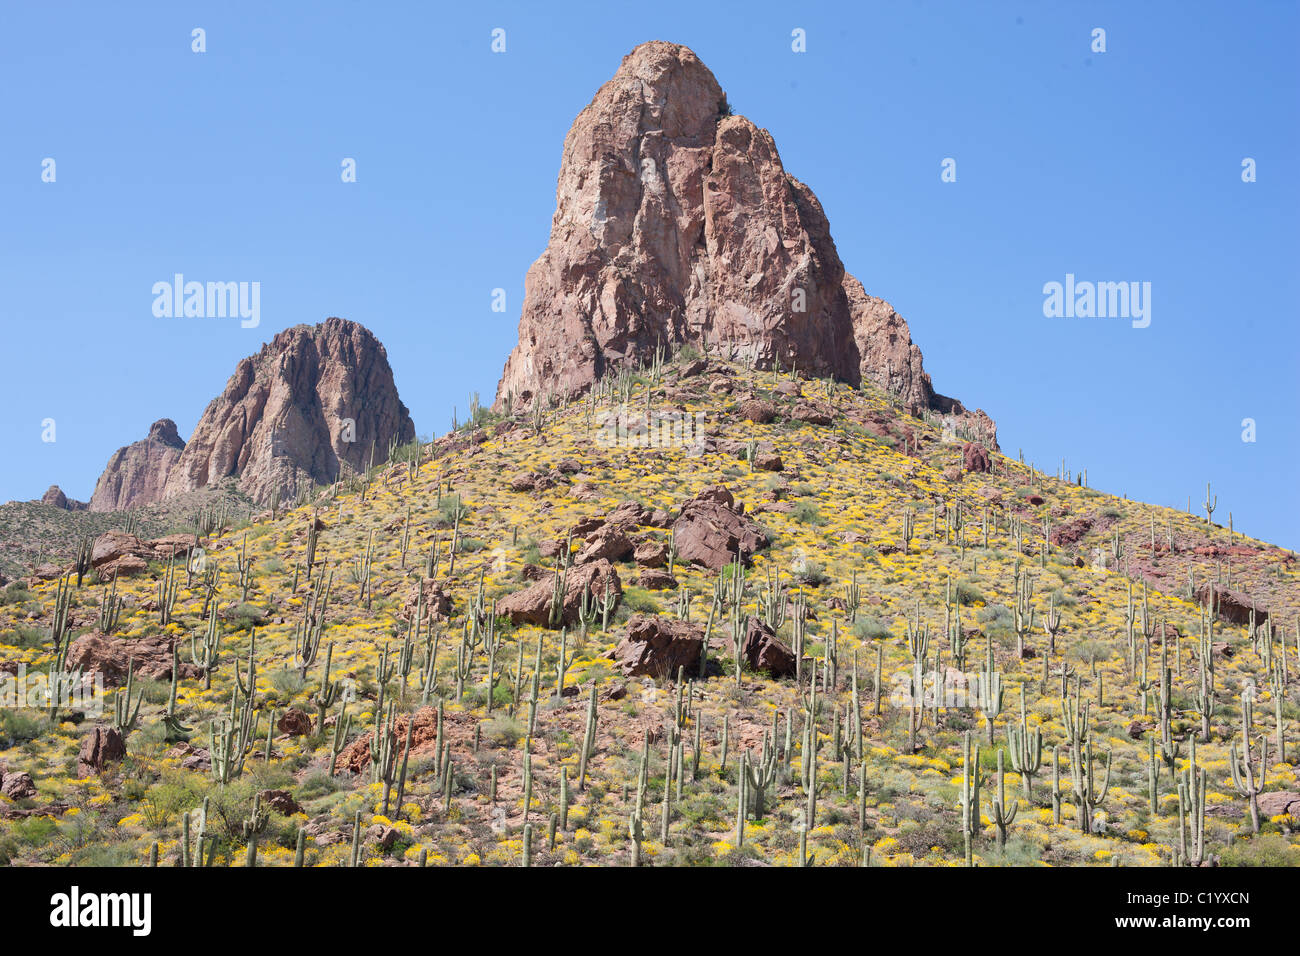 The saguaro cactus is the quintessential plant of the American West. It can reach heights up to 15 meters. Maricopa County, Arizona, USA. Stock Photo